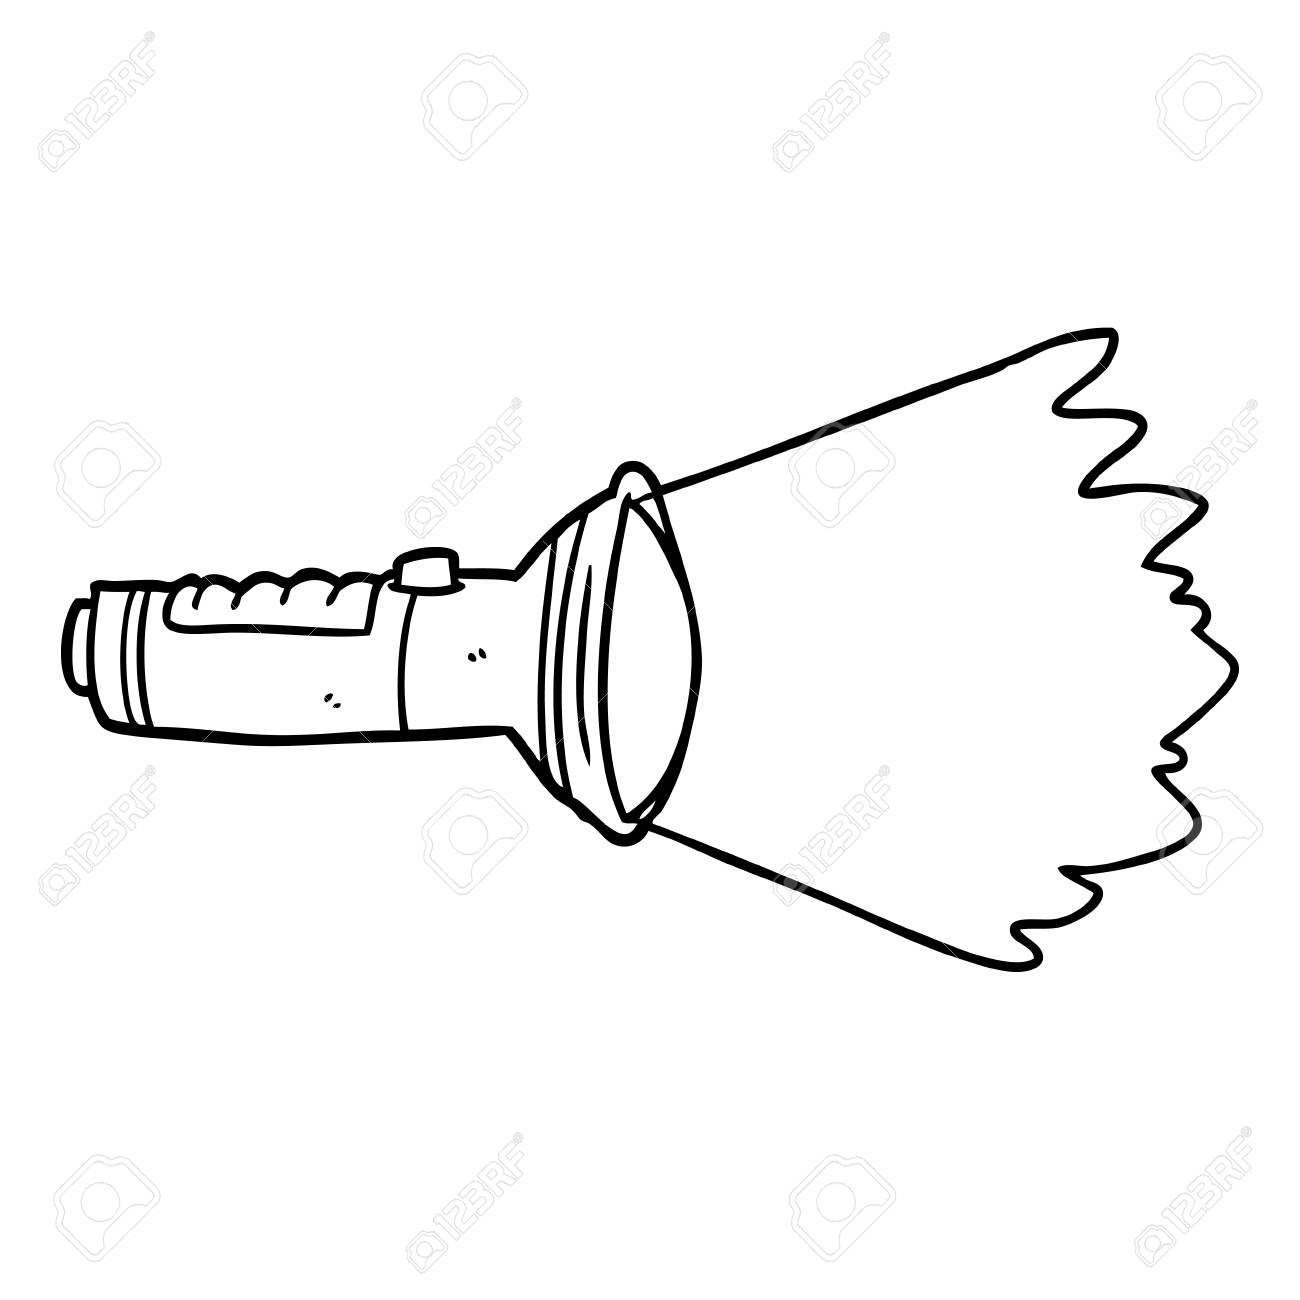 torch clipart electrical